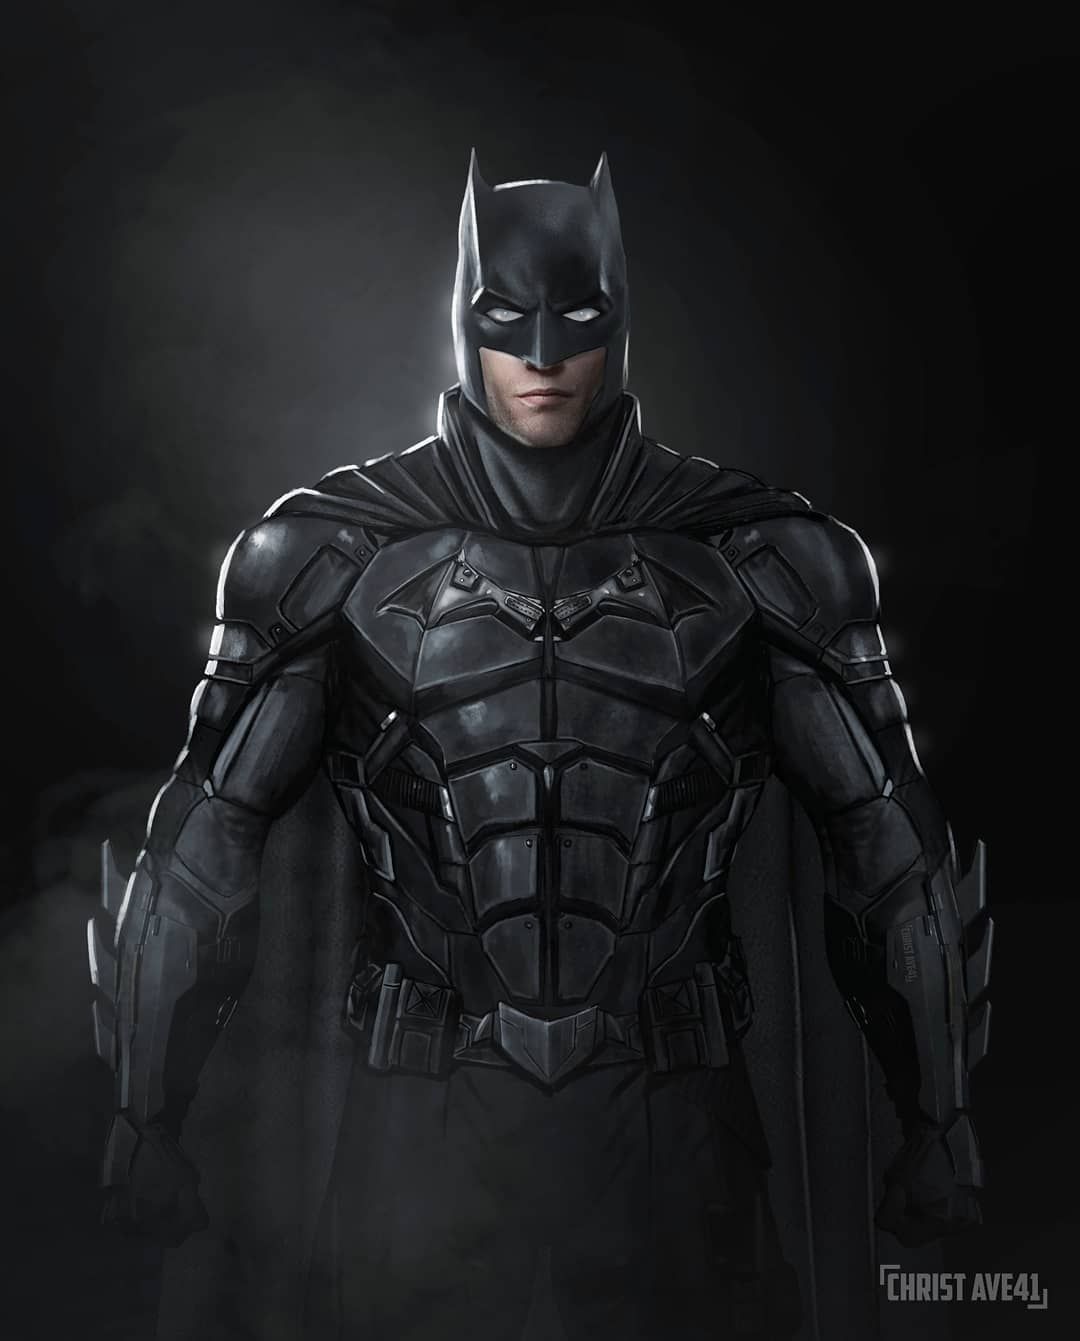 This is my shoot for Robert Pattinson #TheBatman suit based on